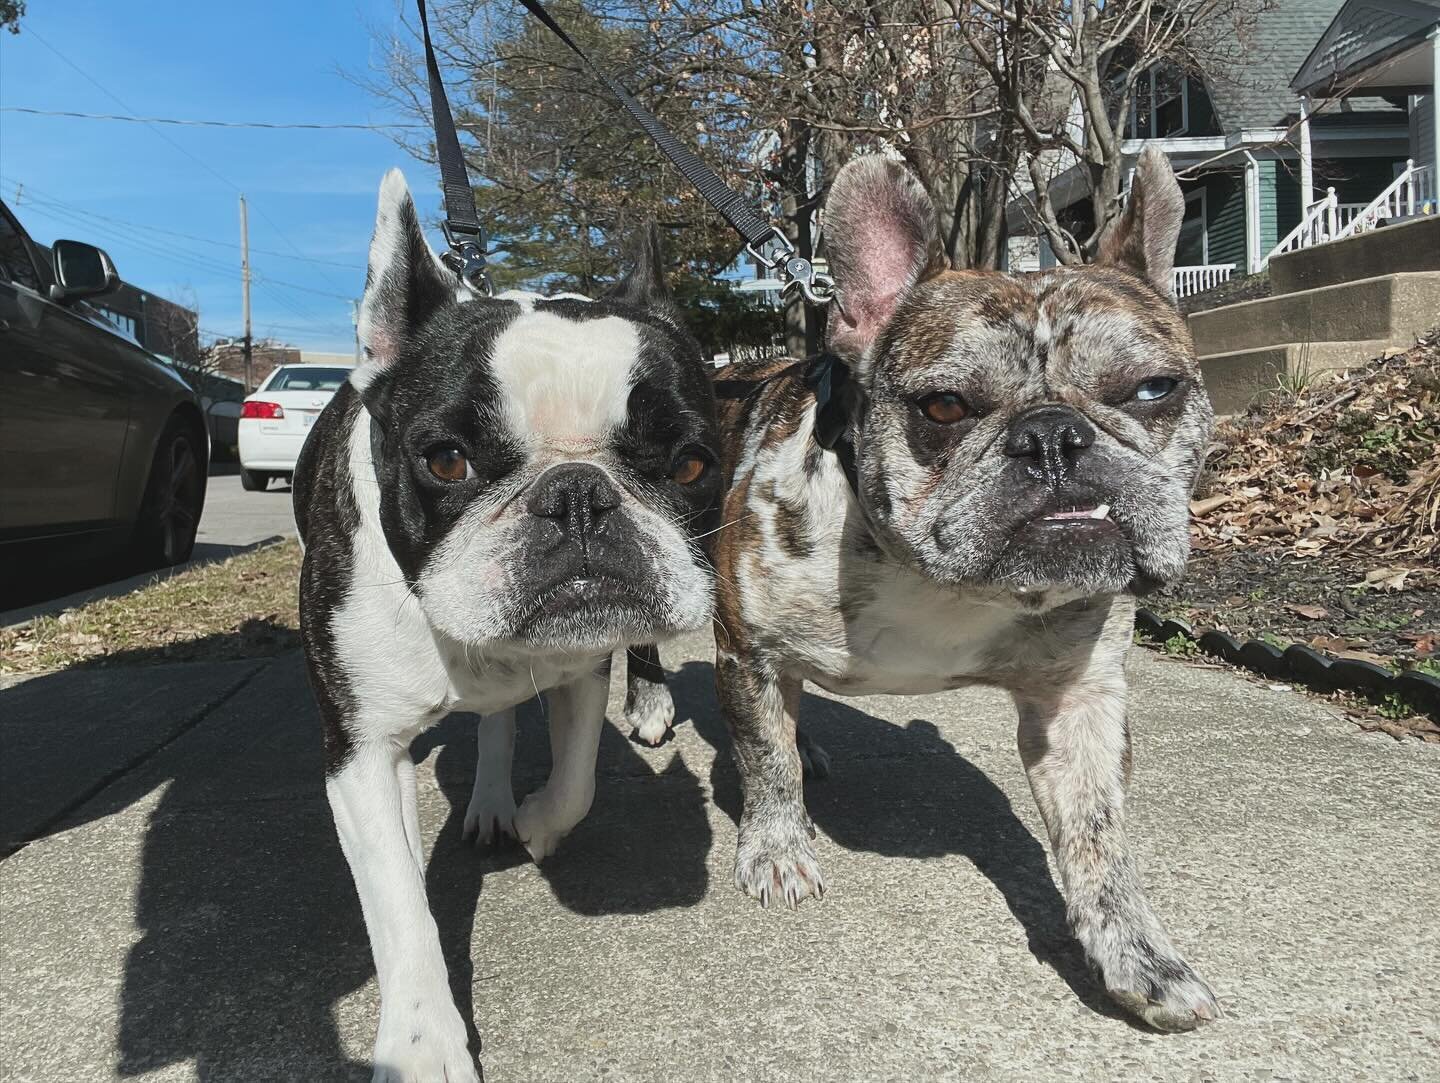 Exploring Hyde Park Square with these two cuties 🐾 Who else loves taking their pups on urban adventures? #HydeParkDogs #FrenchiesofInstagram #PetCareLife #UrbanPups #MillerGallery #DogWalkAdventures #CityDogs #PetLoversUnite #FurryFriends #ExploreWi